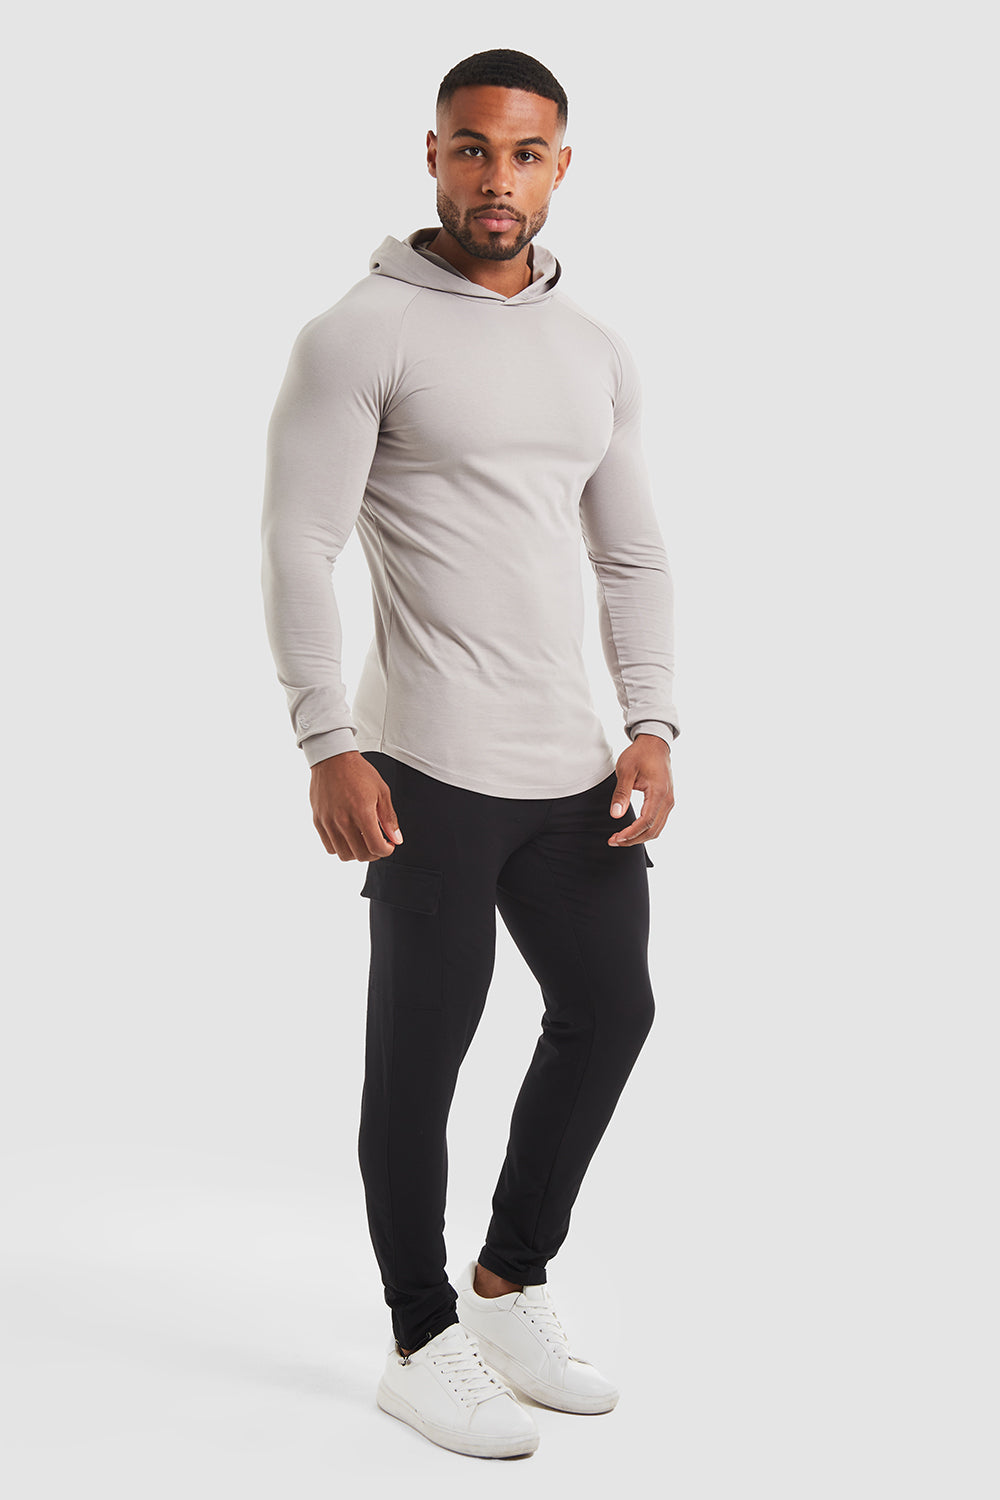 Hooded Top in Concrete - TAILORED ATHLETE - USA